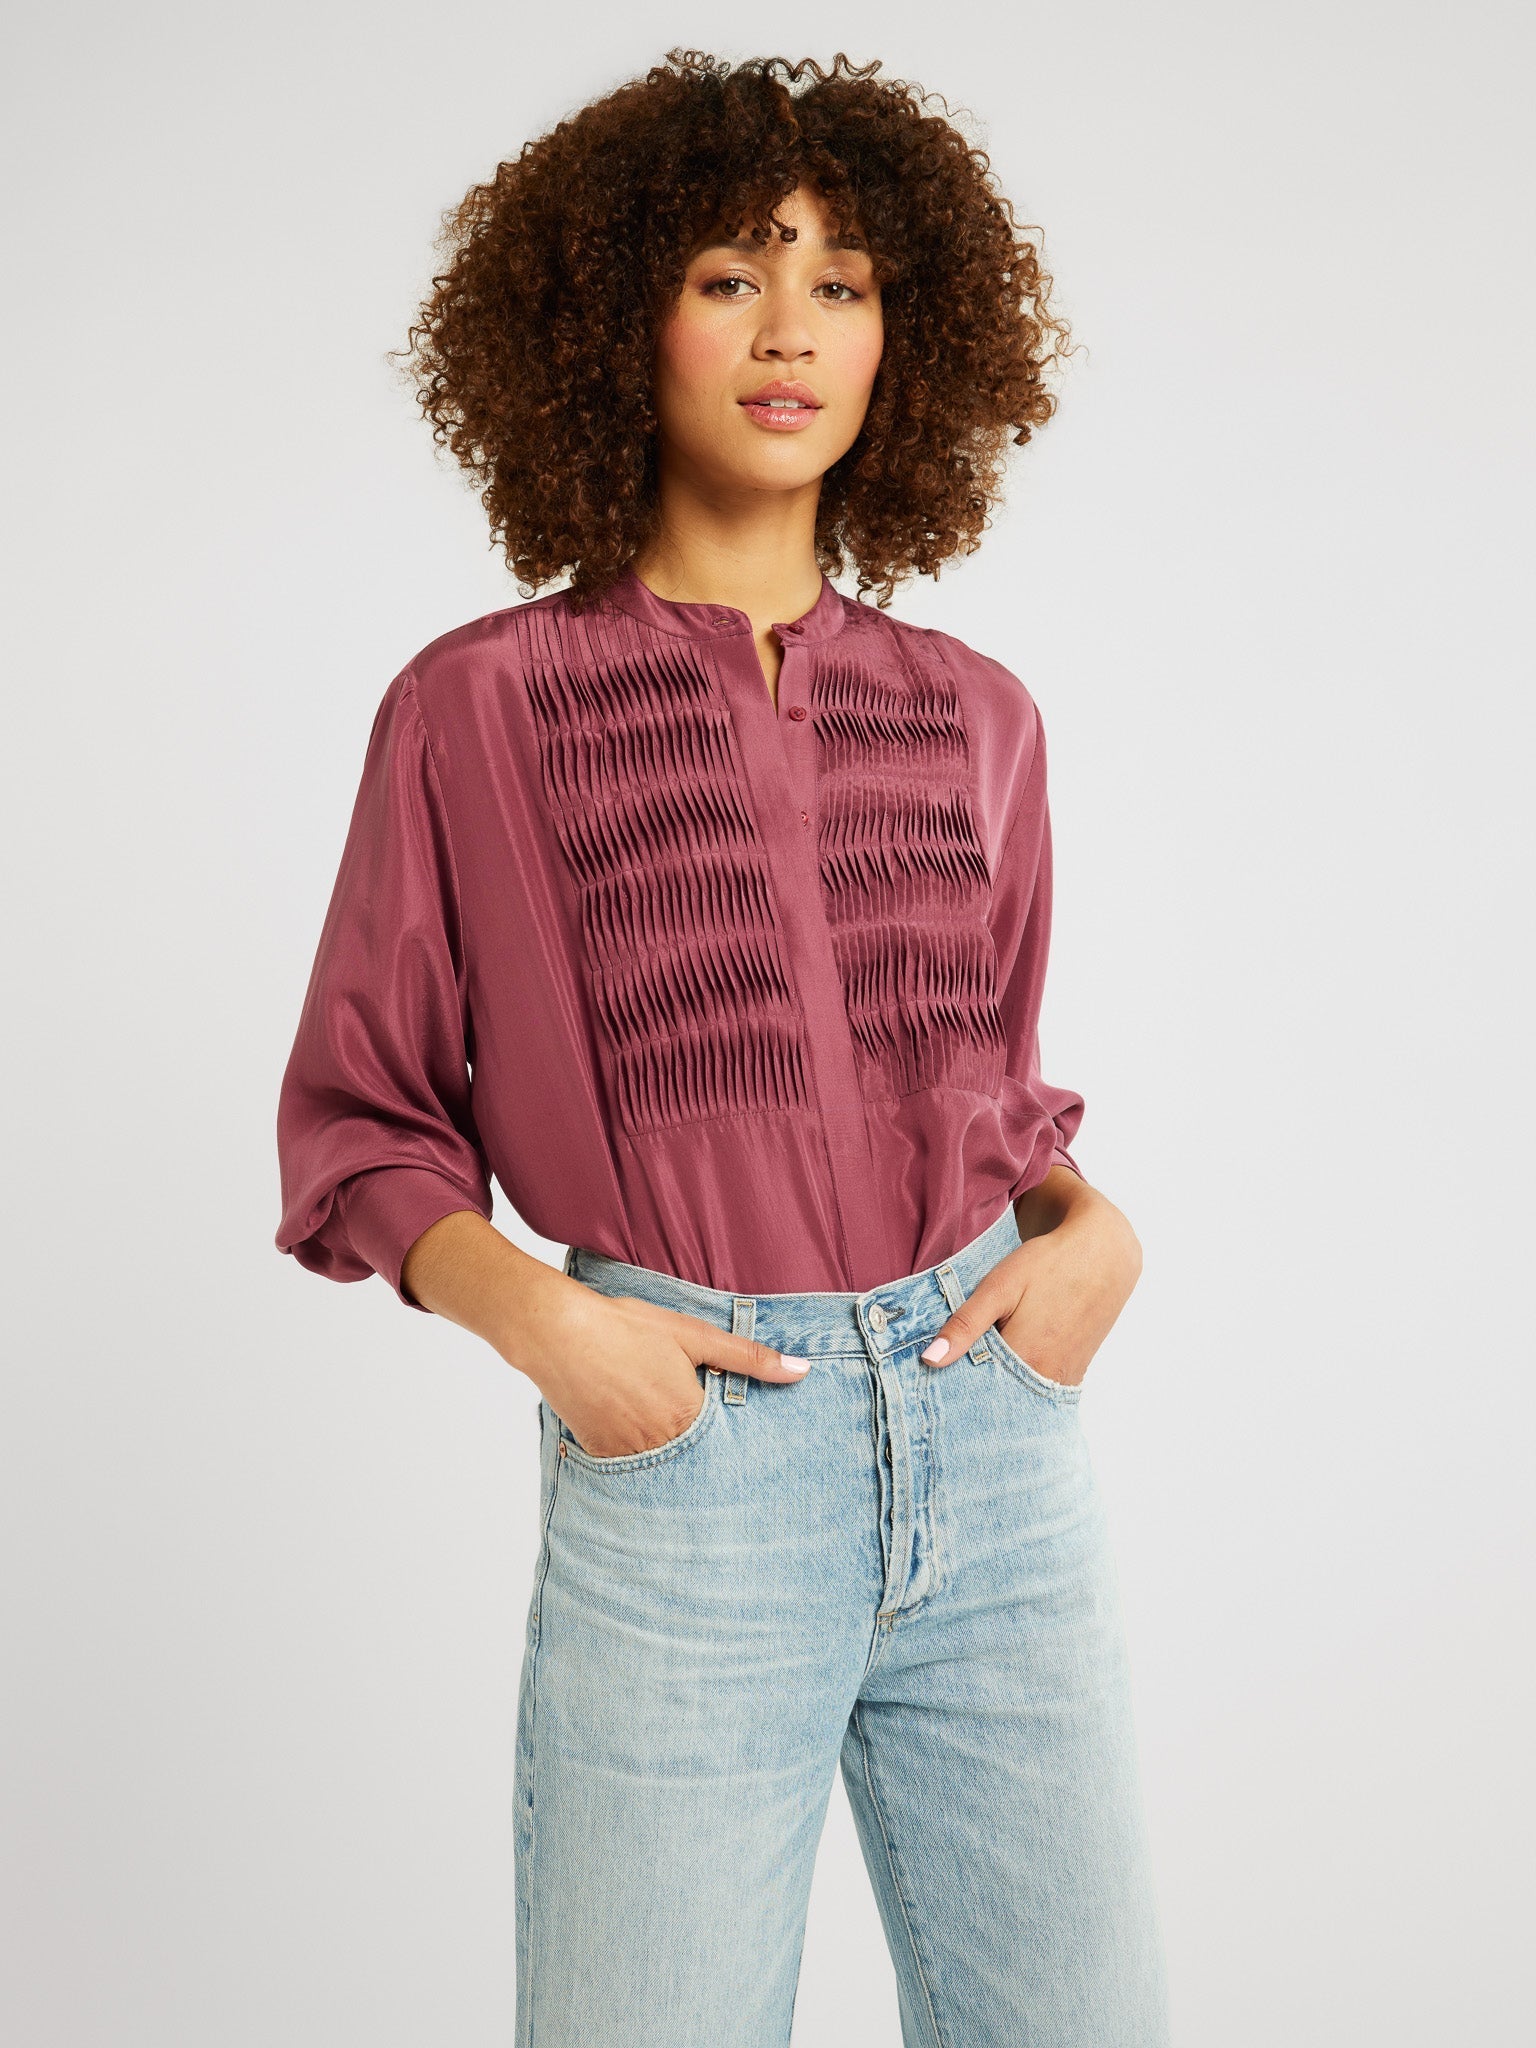 MILLE Clothing Keaton Top in Plum Washed Silk